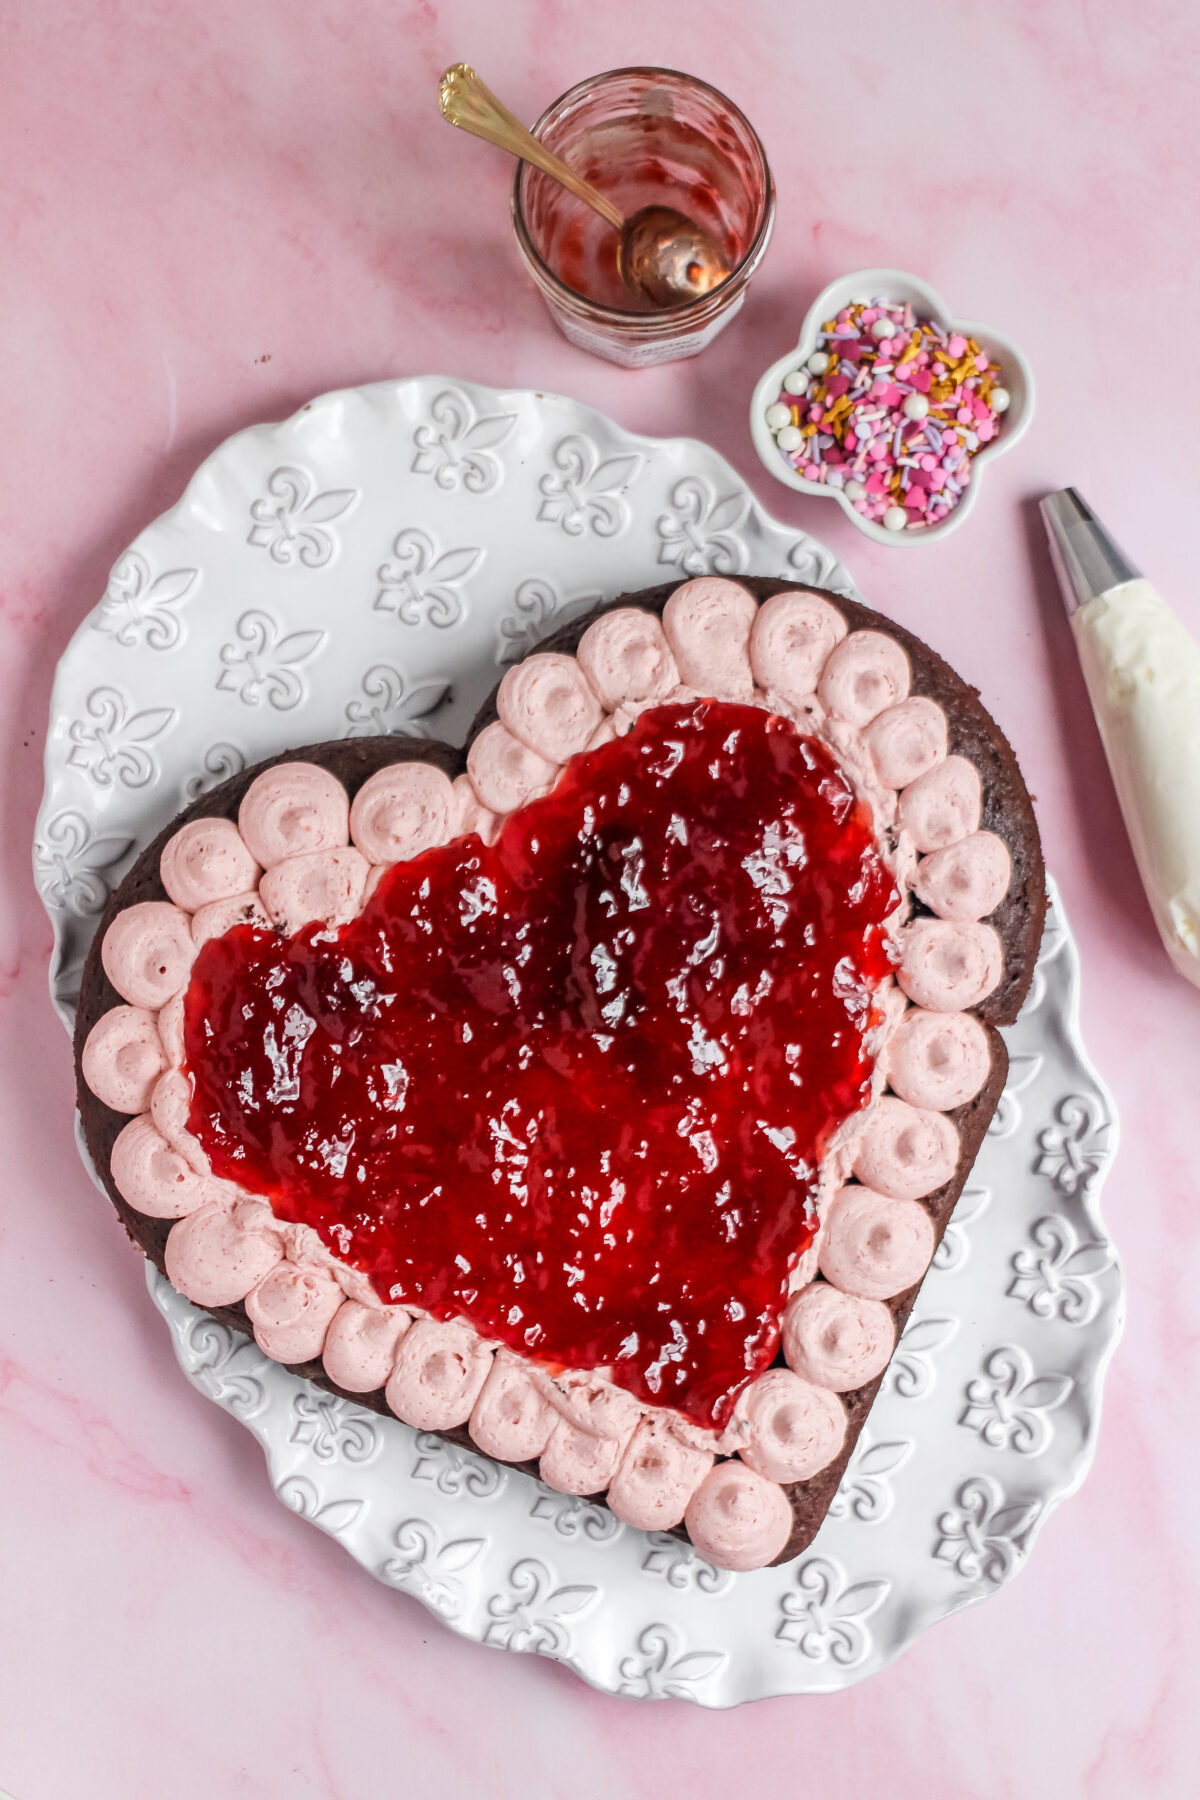 Strawberry jam in a layer over the frosting on the heart shaped cake.